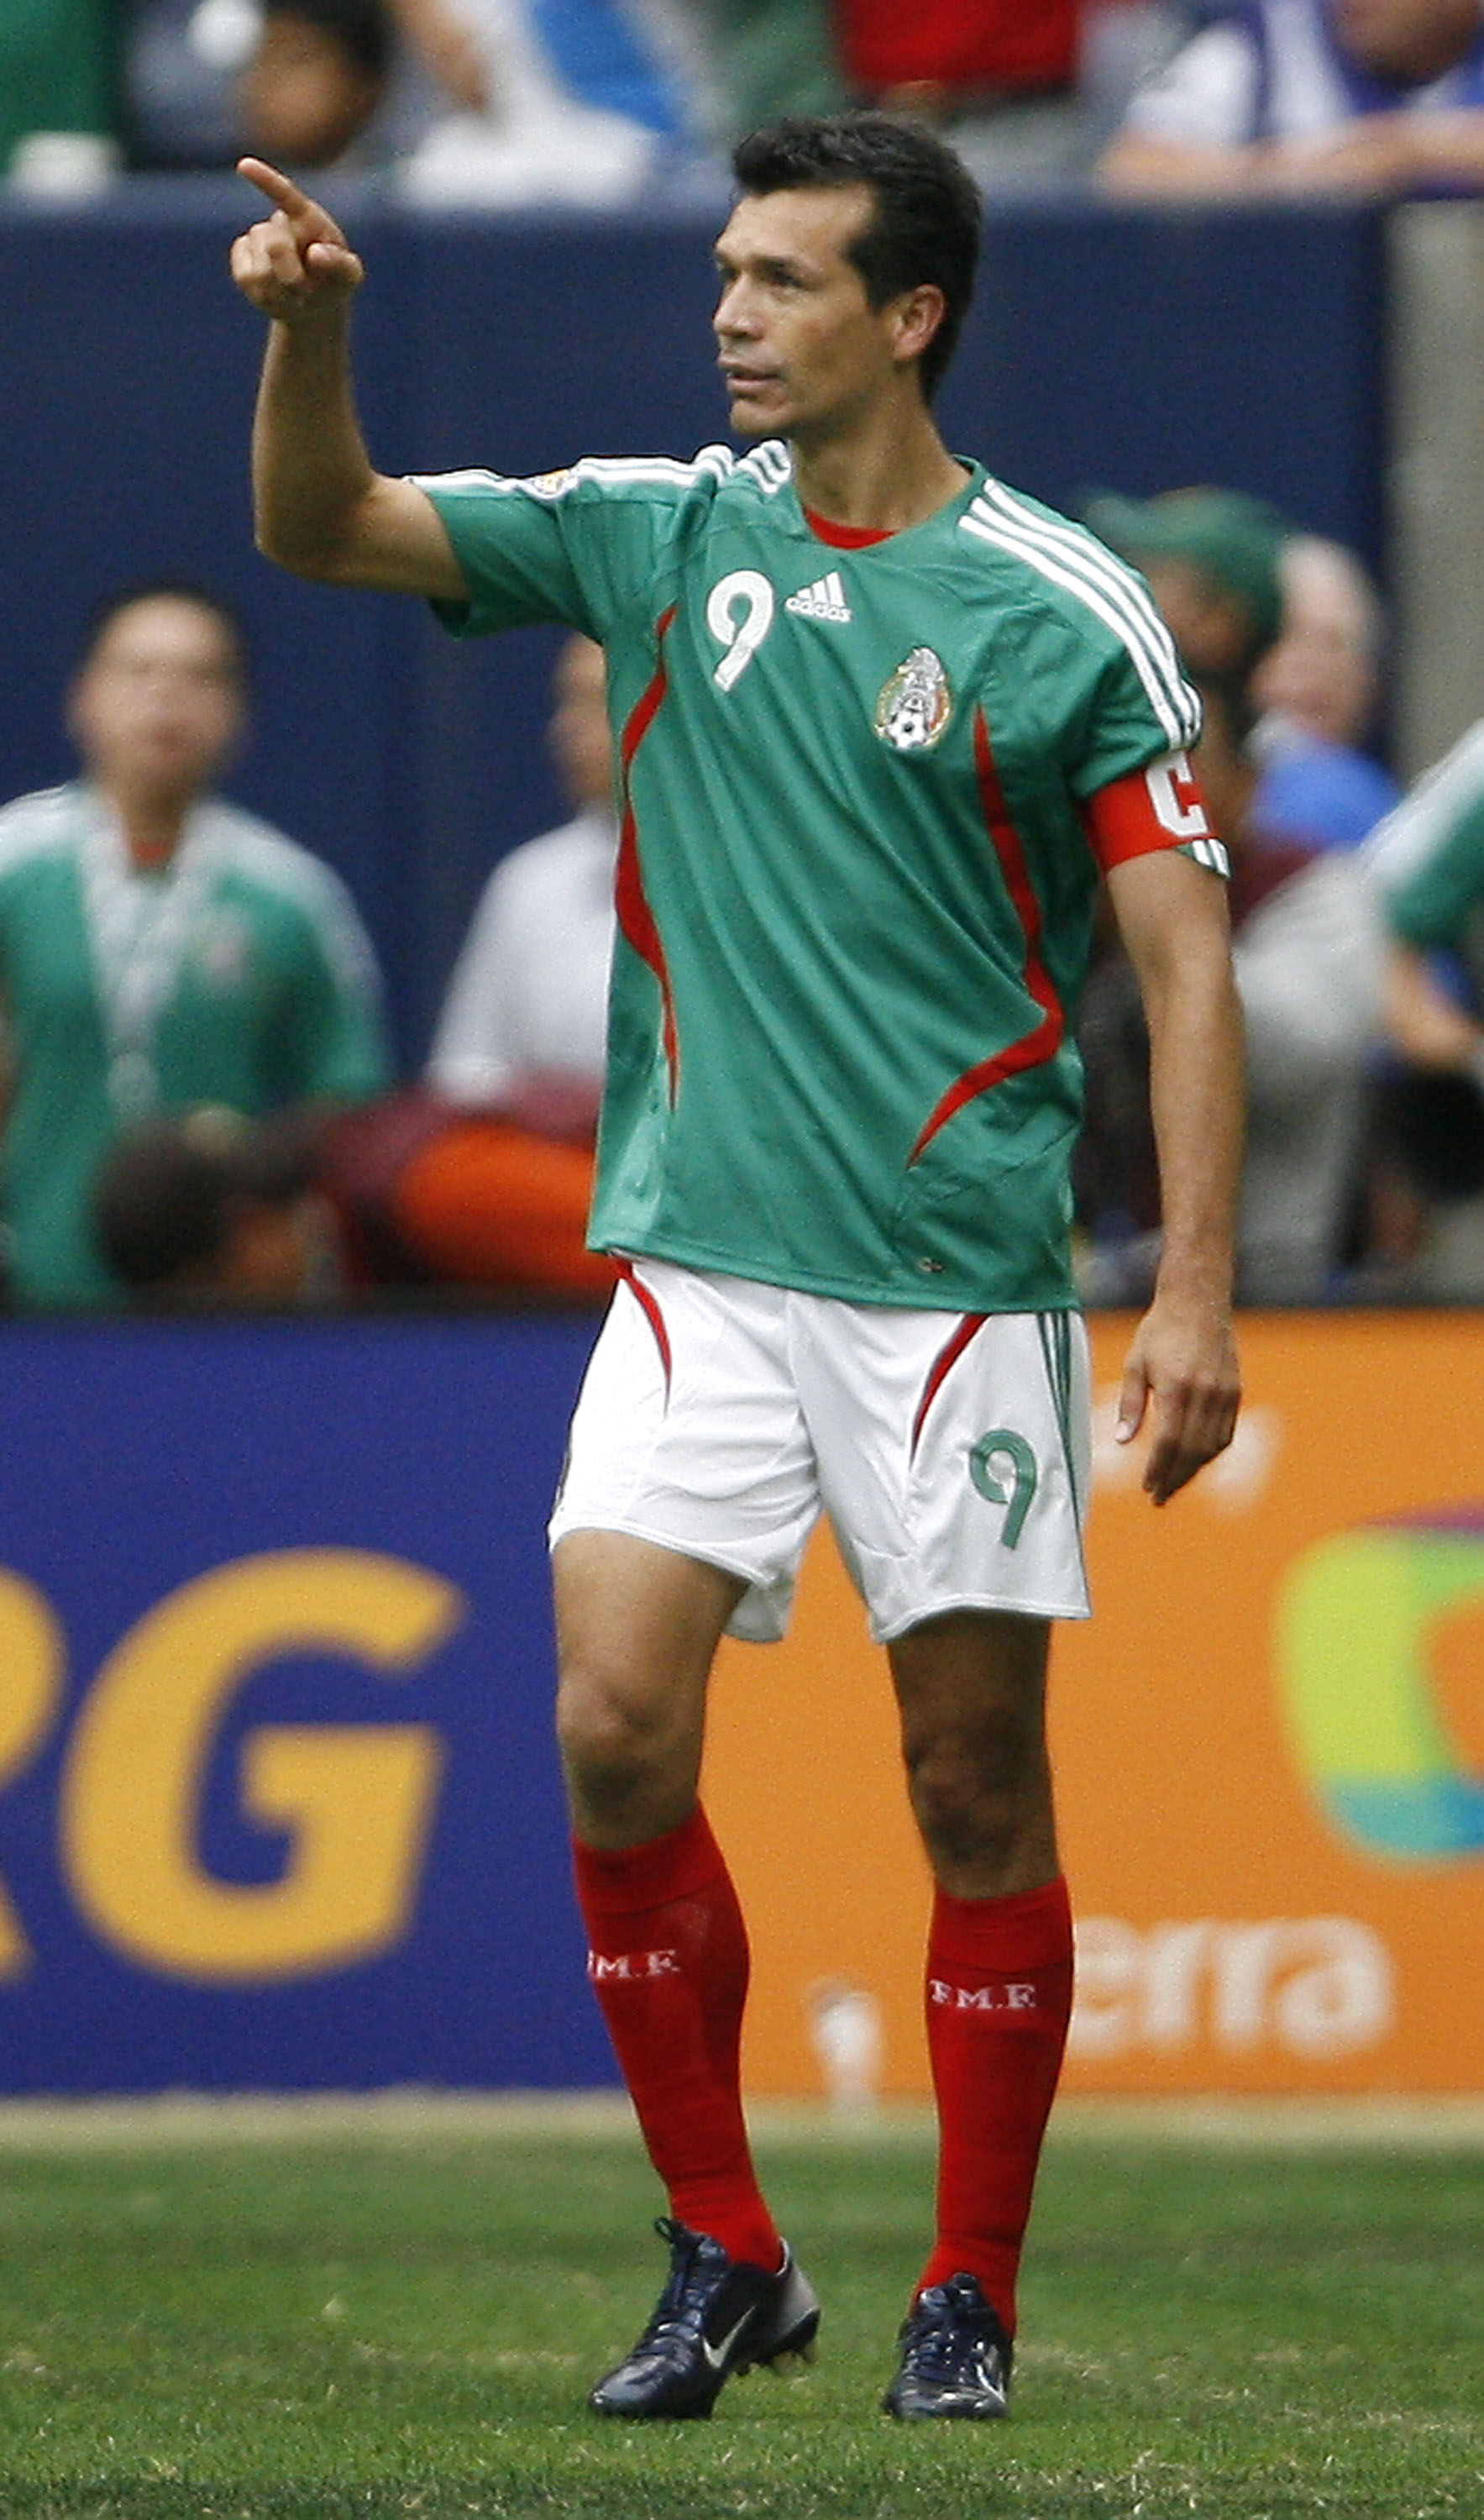 HOUSTON - JUNE 17: Jared Borgetti #9 of Mexico acknowledges the crowd as he celebrates scoring a goal against Costa Rica during their quarterfinal match of the CONCACAF Gold Cup 2007 tournament at Reliant Stadium June 17, 2007 in Houston, Texas. Mexico de